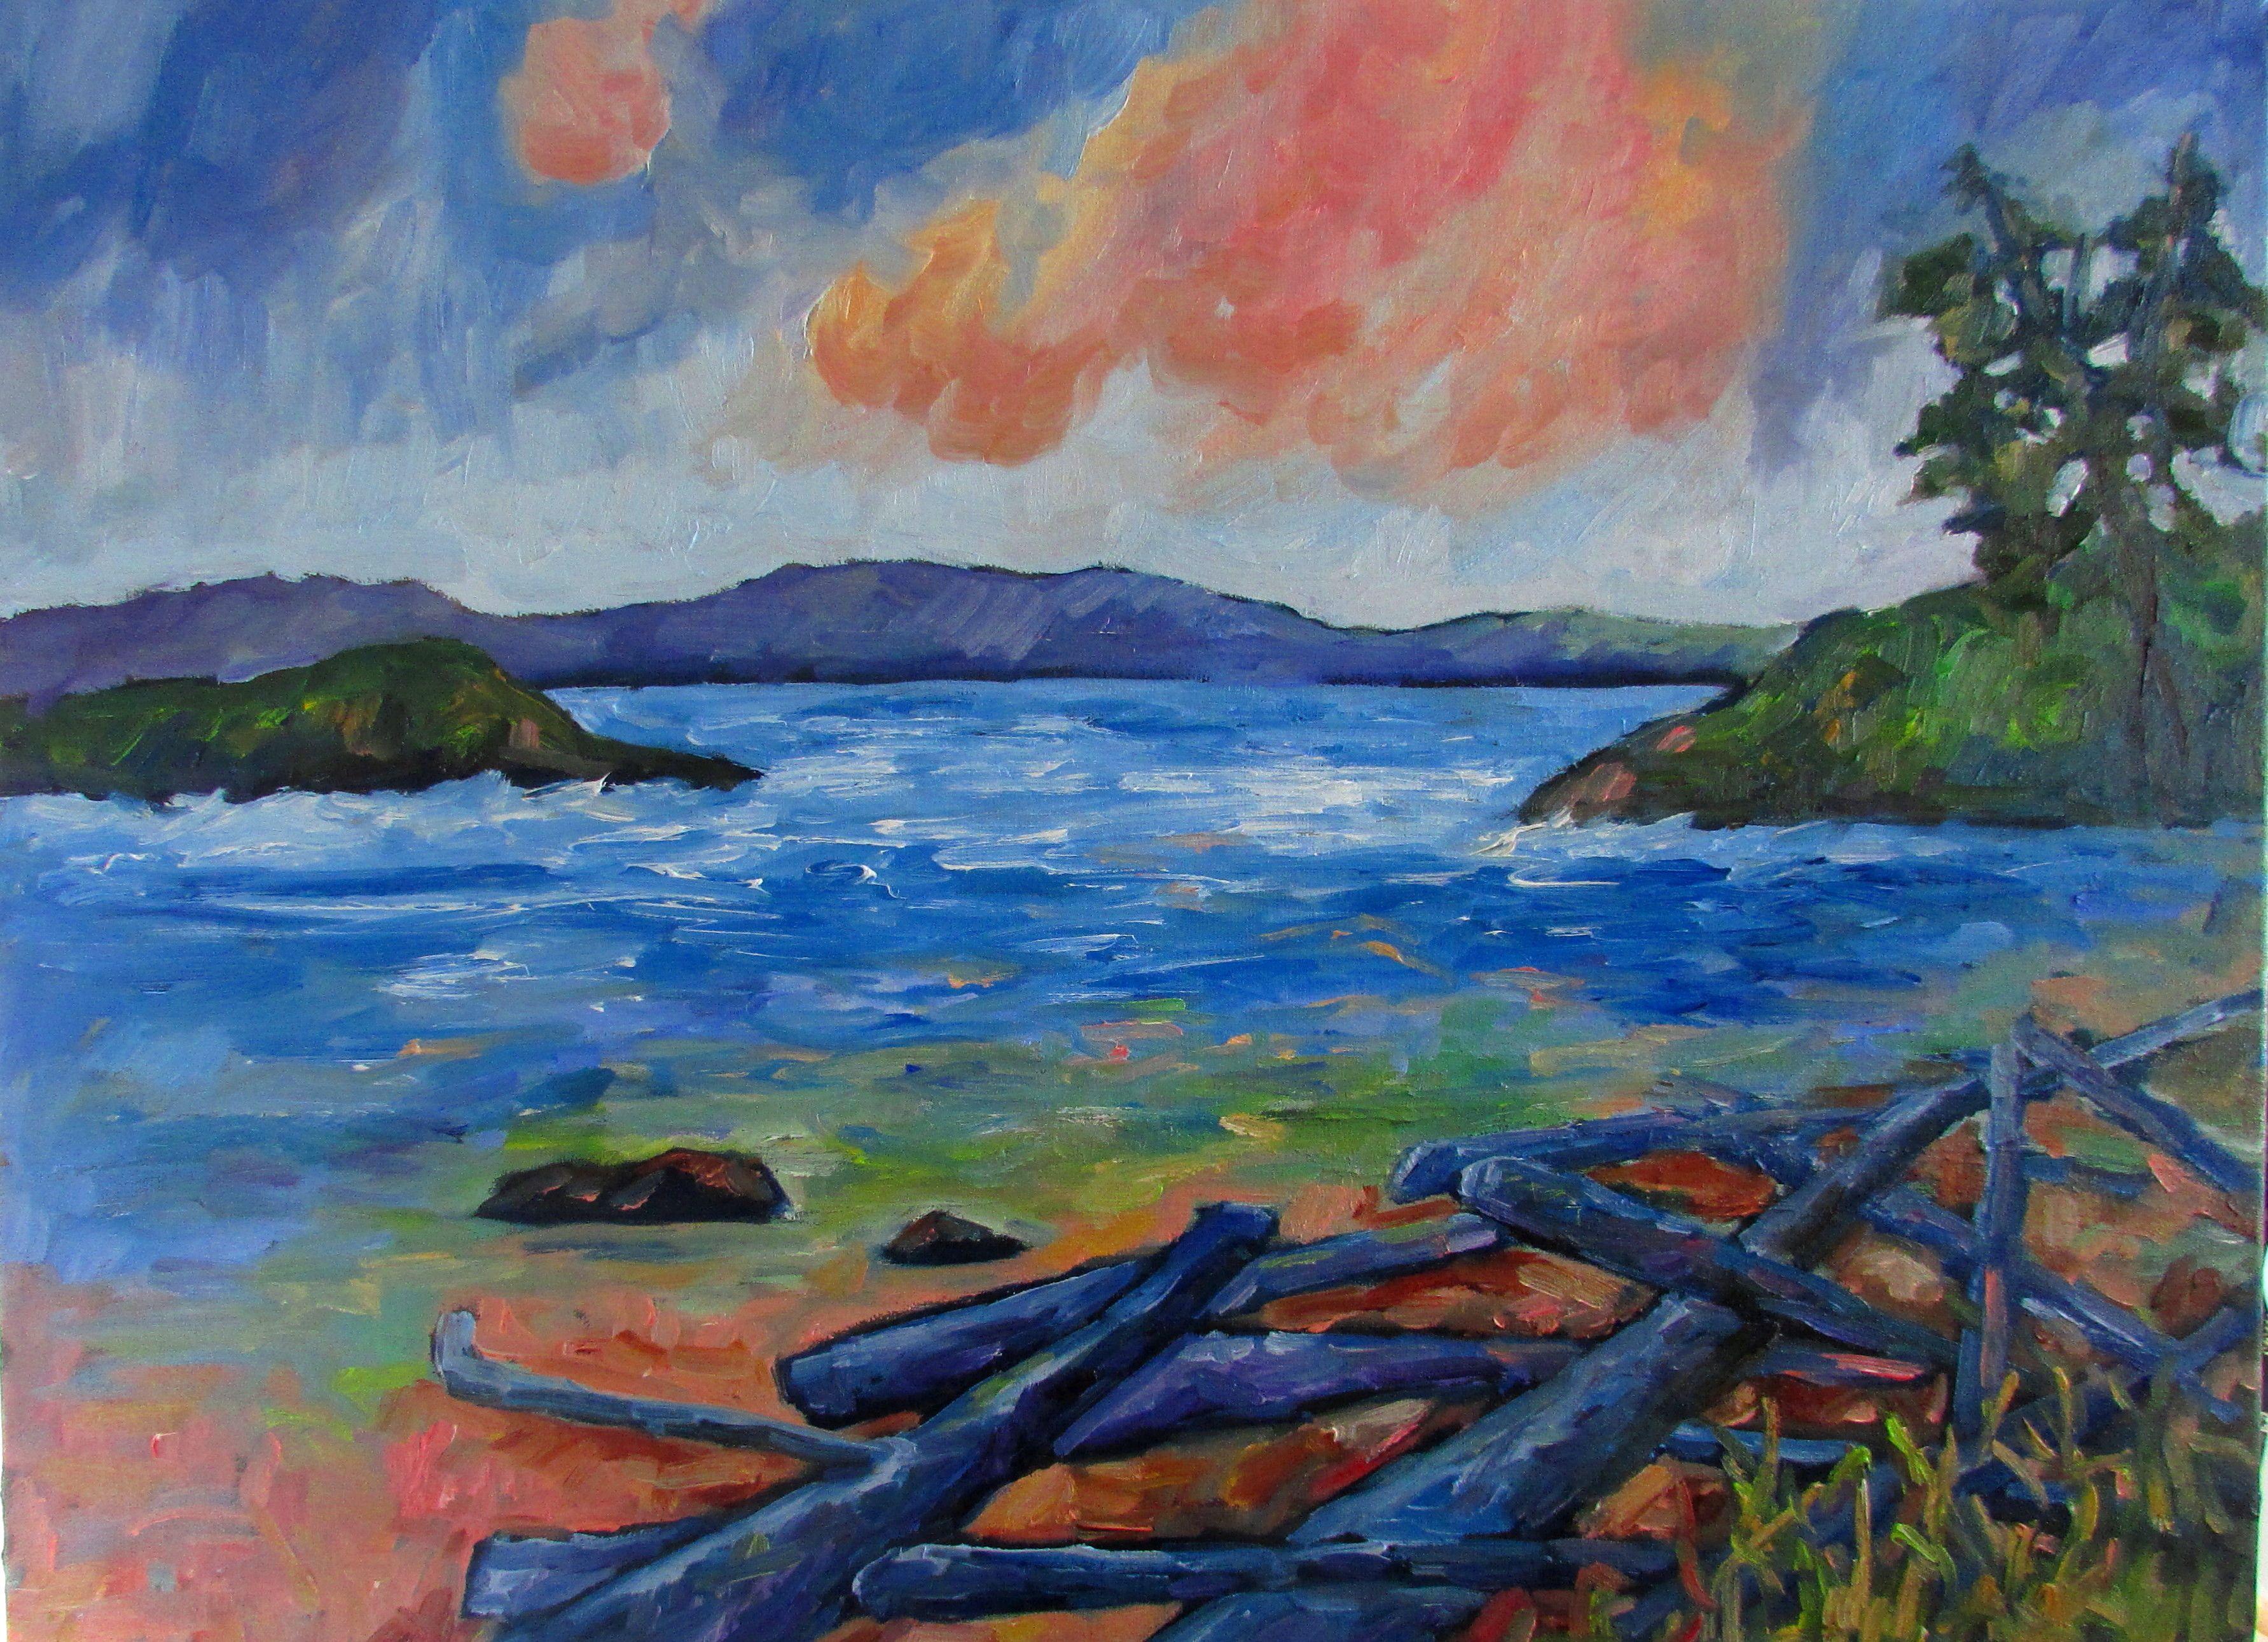 Tofino is on the west coast of Vancouver Island and is an area of rugged beauty.  The power of the Pacific ocean regularly tosses huge logs up onto the beach after the winter storms. This painting is vivid and textural and the sides of the slim